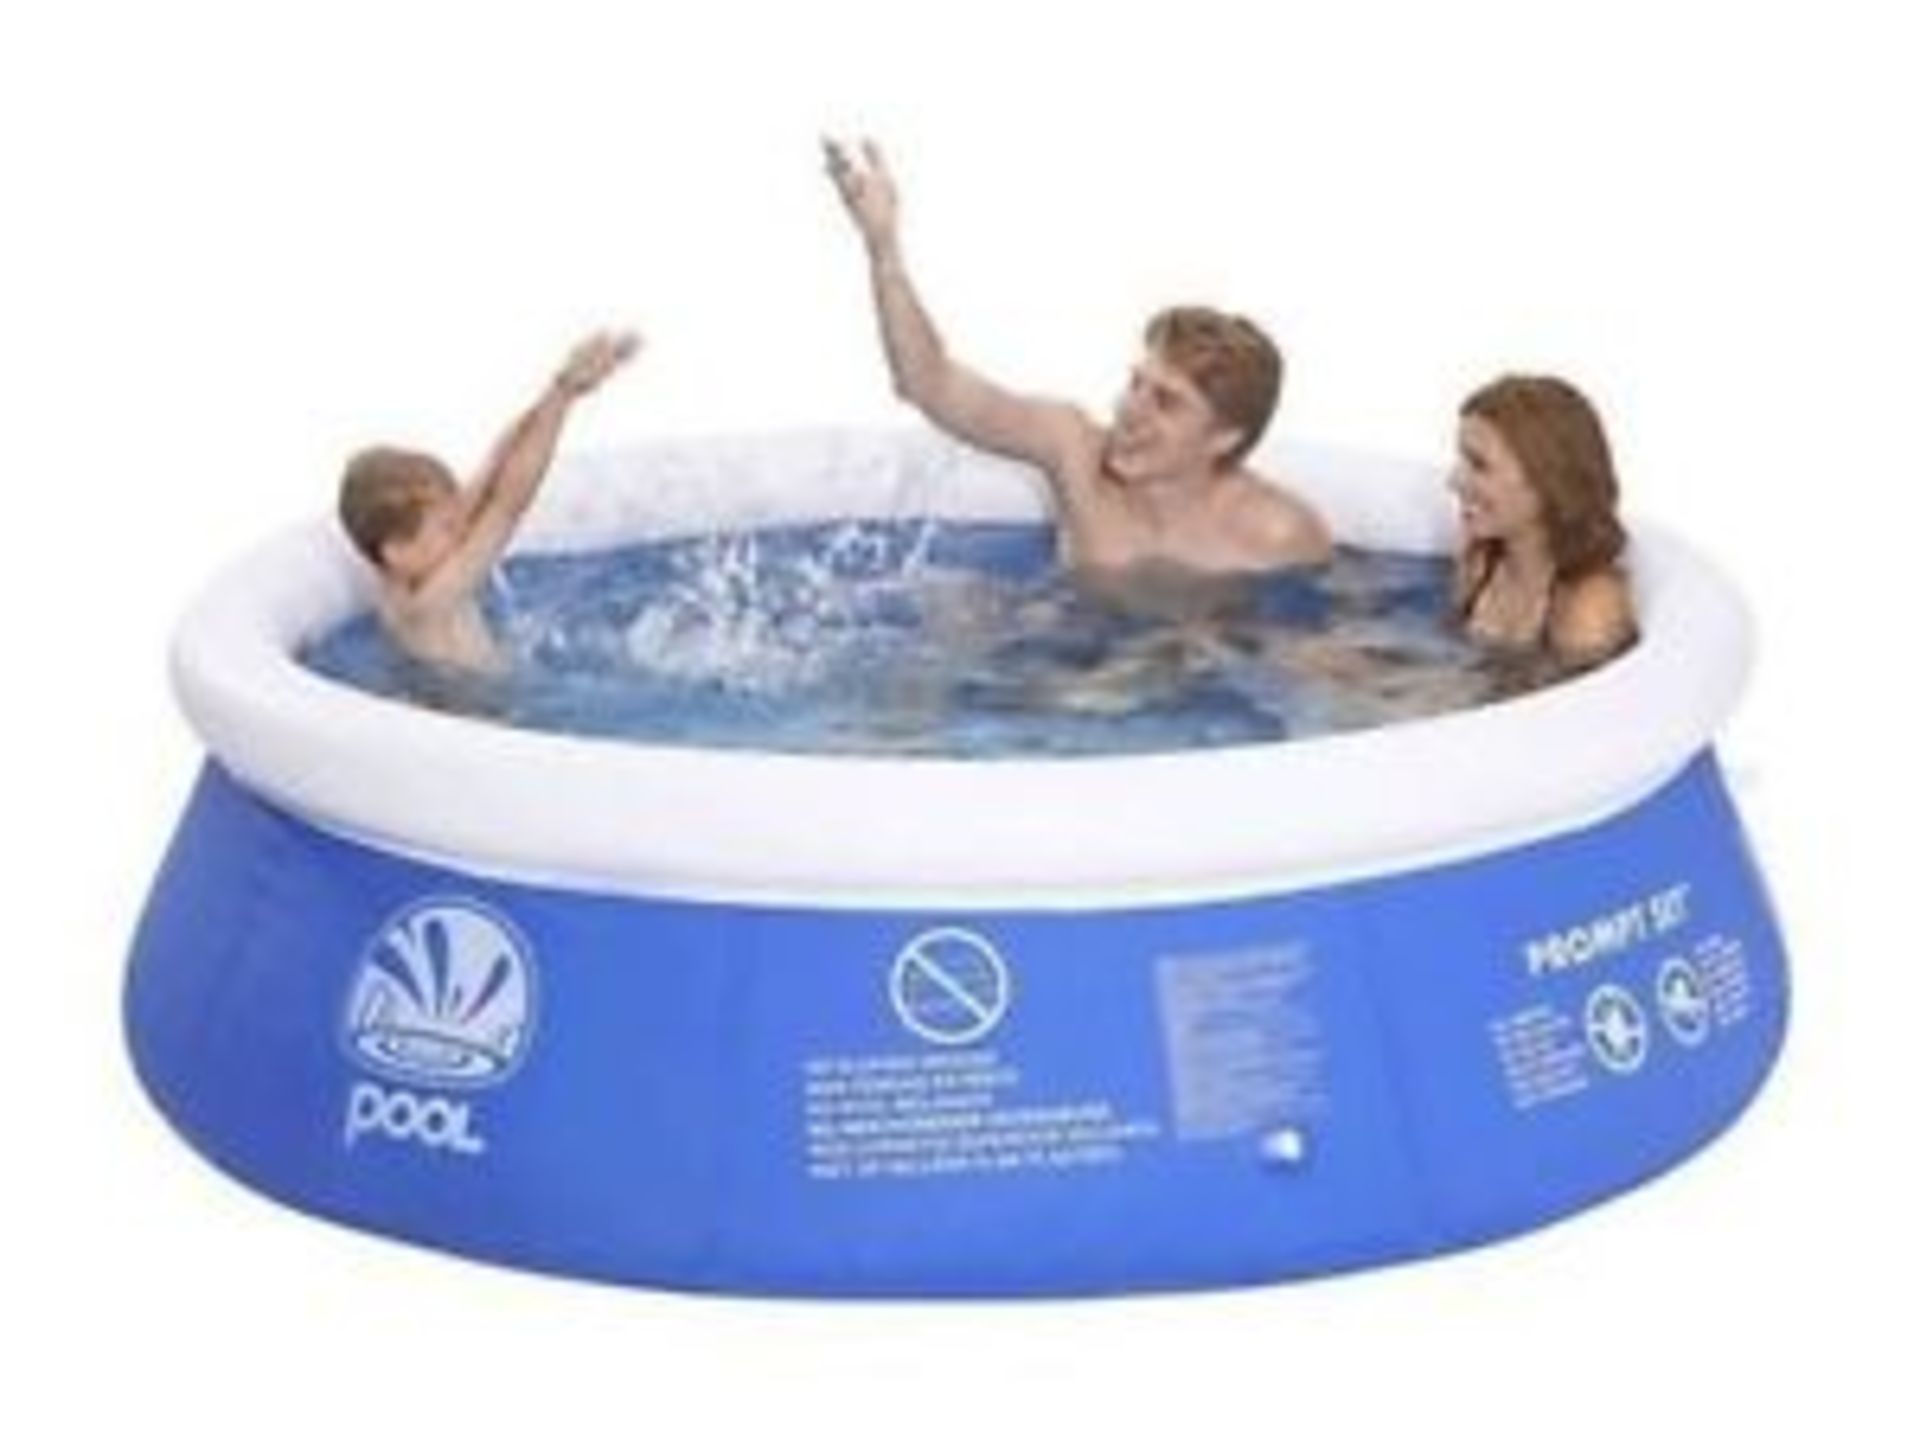 V Brand New 2.4m Quick Up Out Door Pool ISP £77.50 (Amazon) X 2 YOUR BID PRICE TO BE MULTIPLIED BY